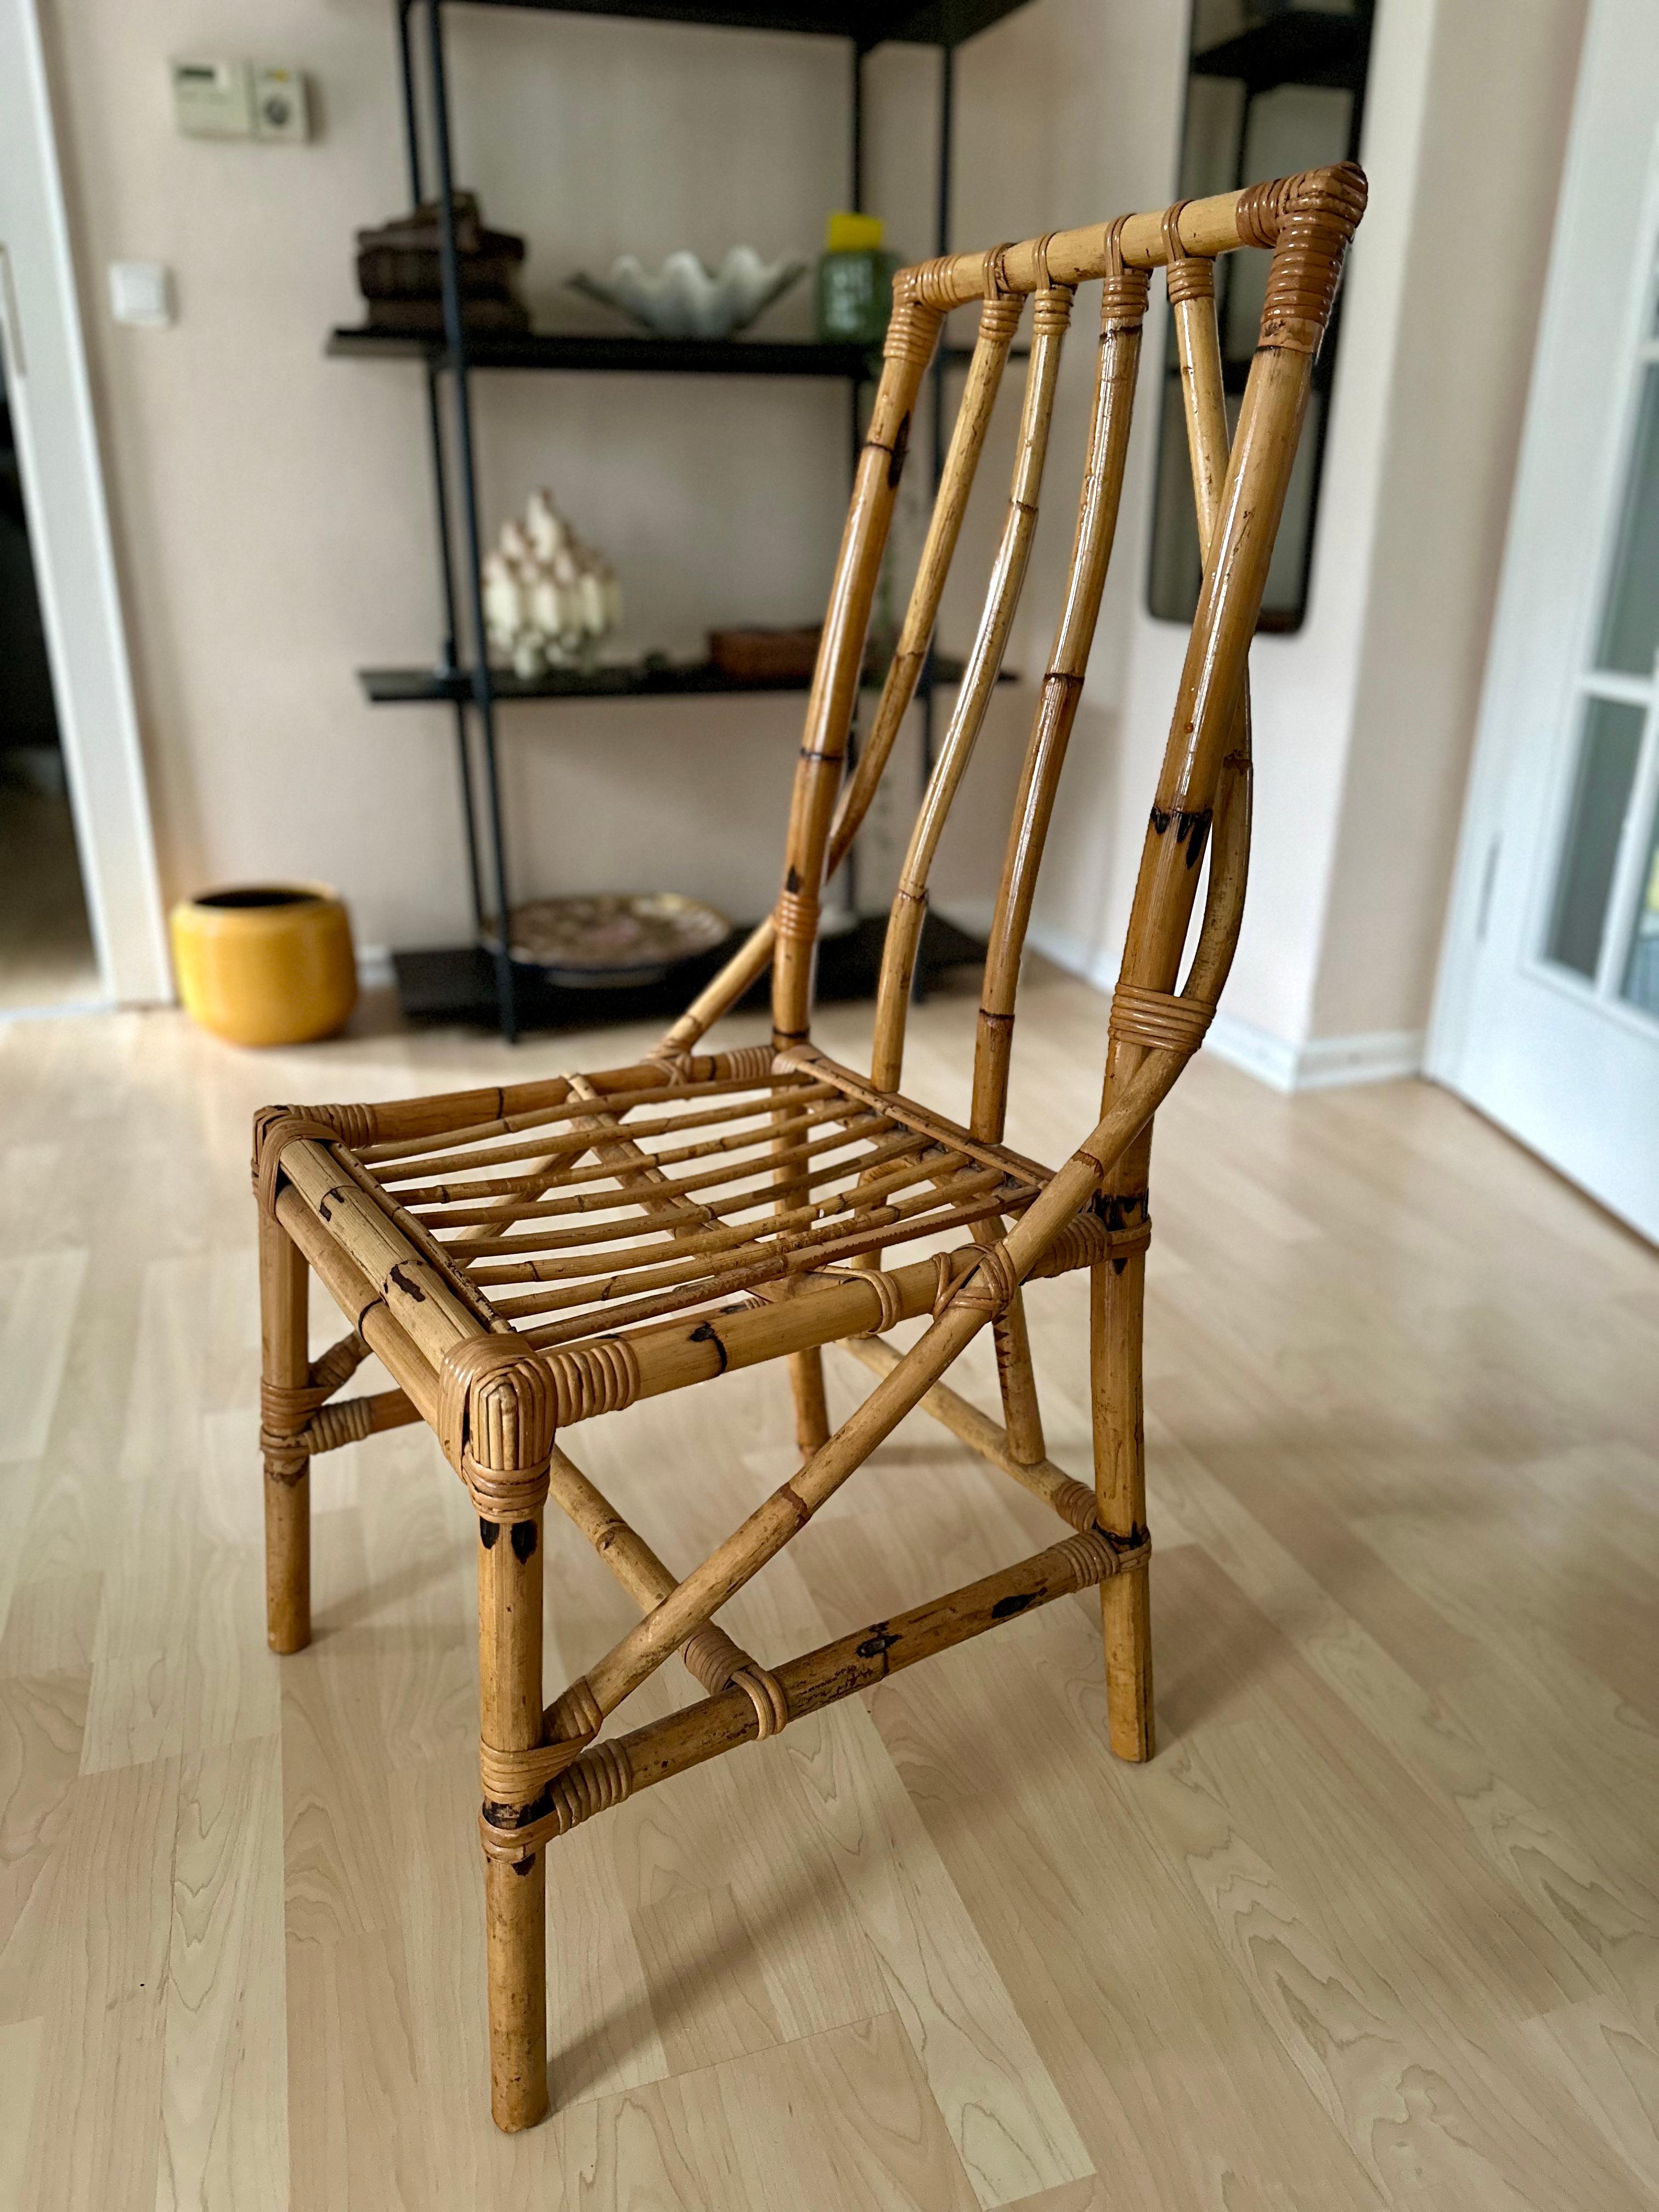 Indulge in the allure of mid-century Italian design with our finely crafted Rattan Chair from the 1950s. This masterpiece boasts an organic form that catches the eye, highlighted by two graceful struts extending from the backrest to the front legs.